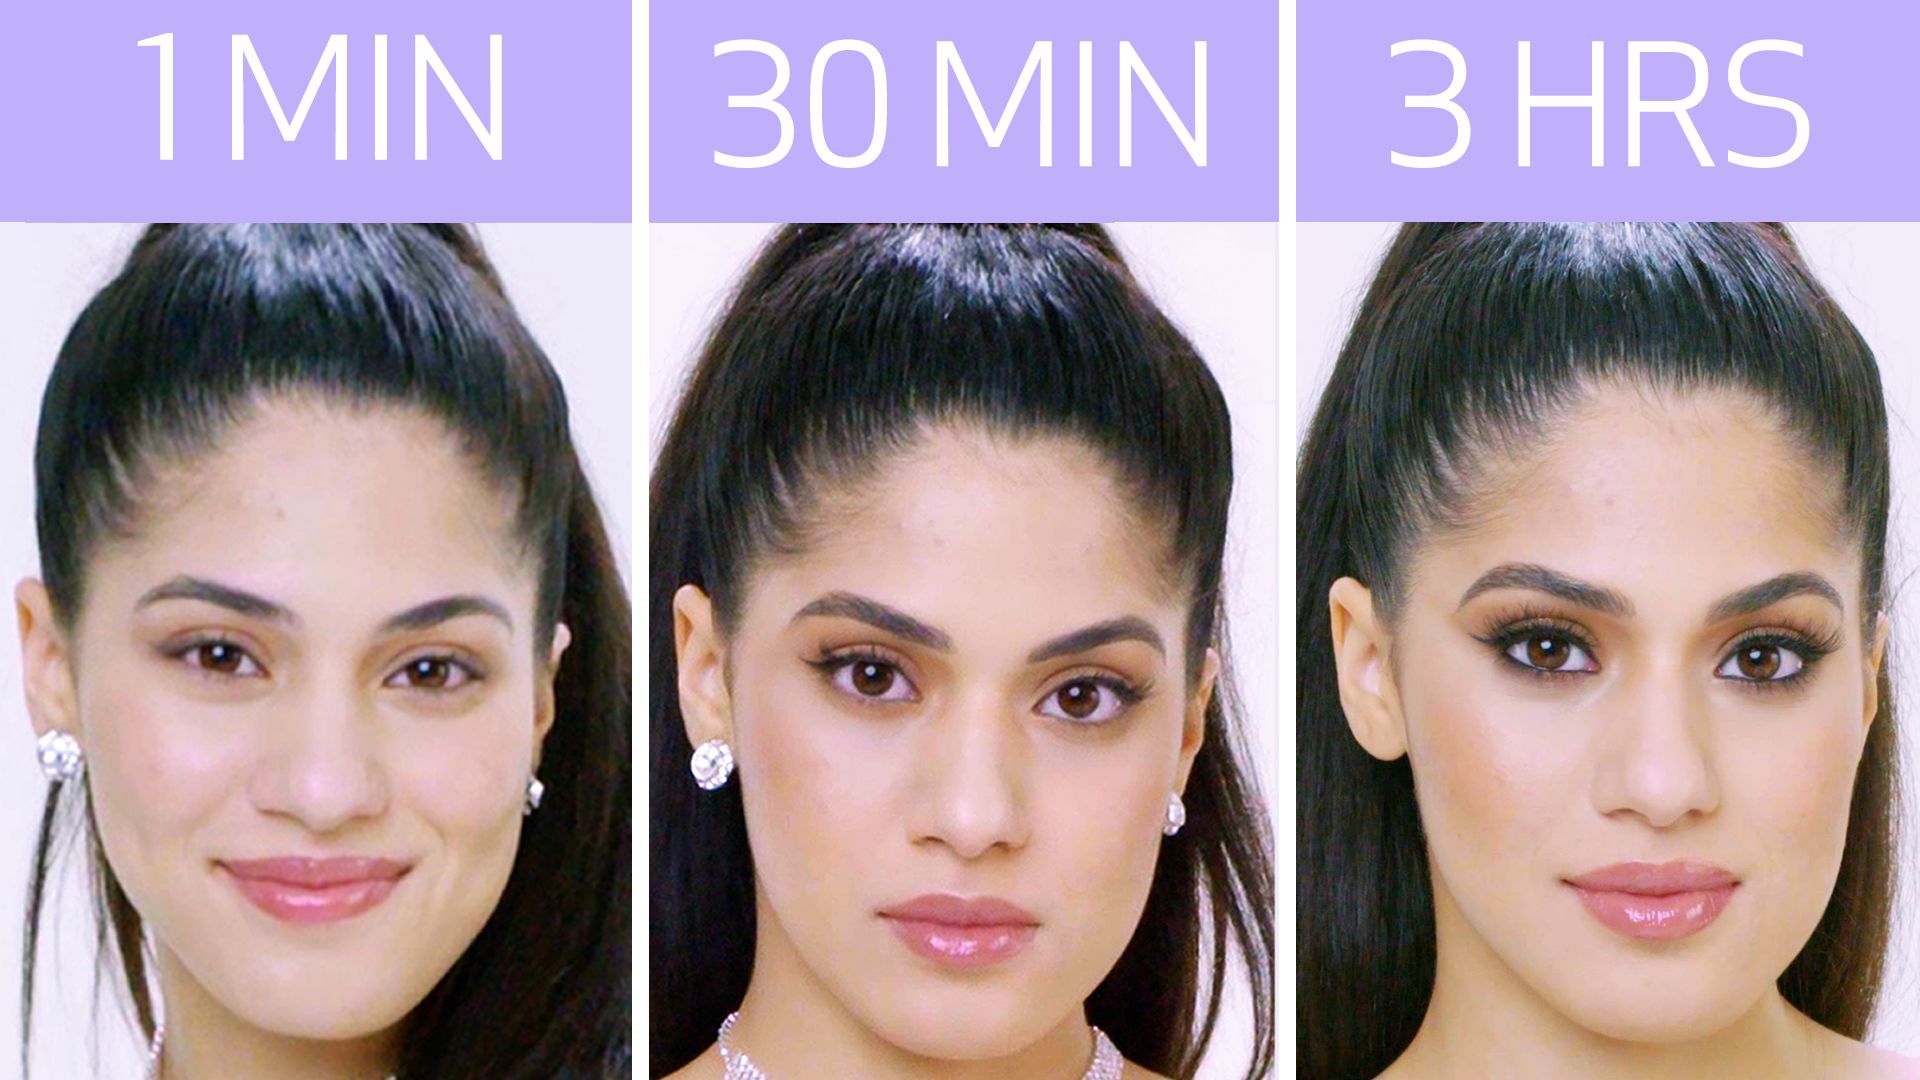 Watch Getting Ariana Grandes Look In 1 Minute 30 Minutes And 3 Hours